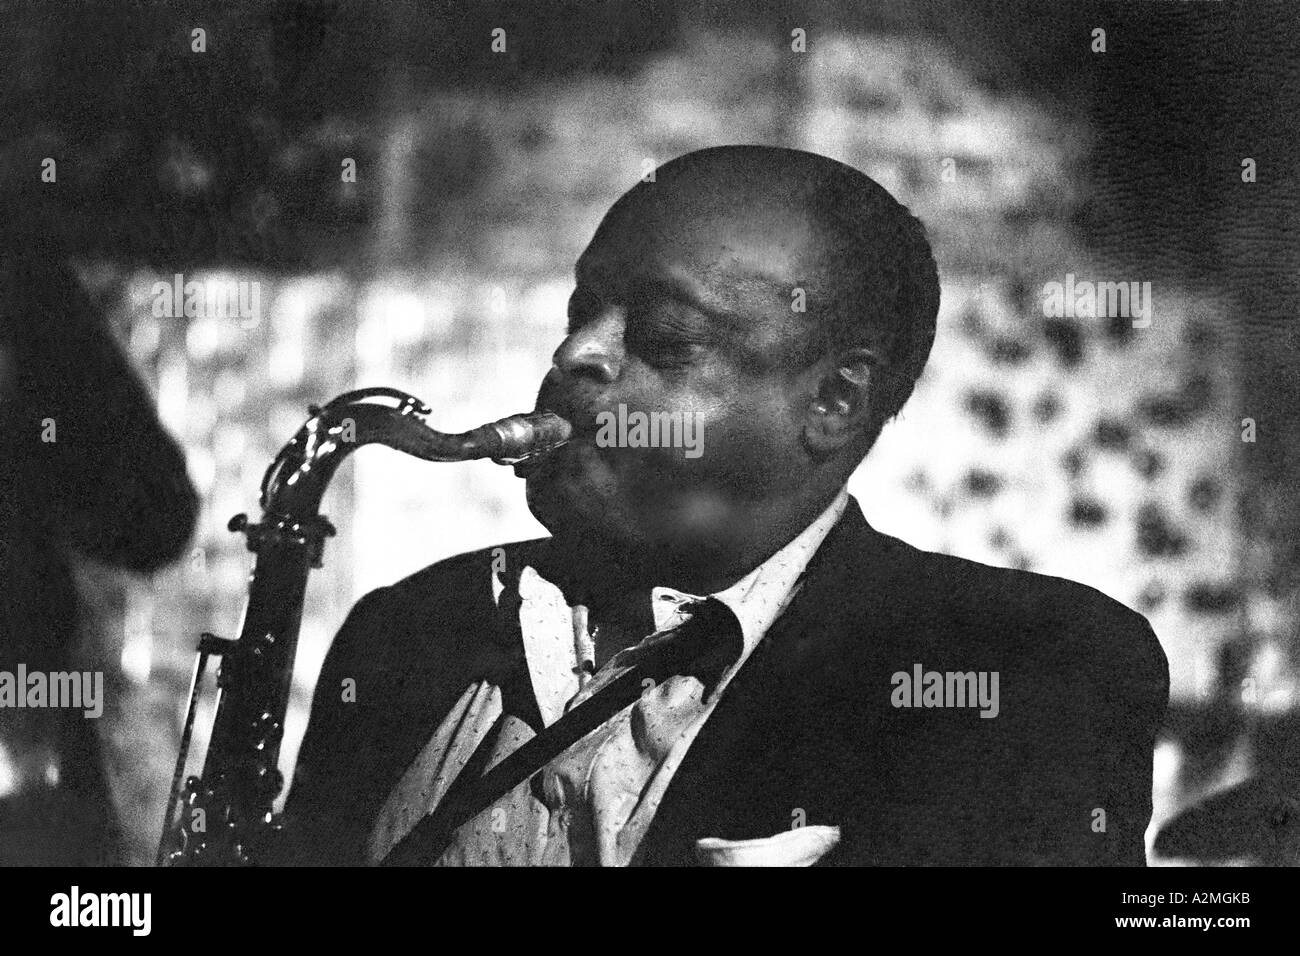 Ben Webster playing at Ronnie Scott's Club near the end of his career. He played because 'he loved it'. He died 20 Sep,1973. Stock Photo